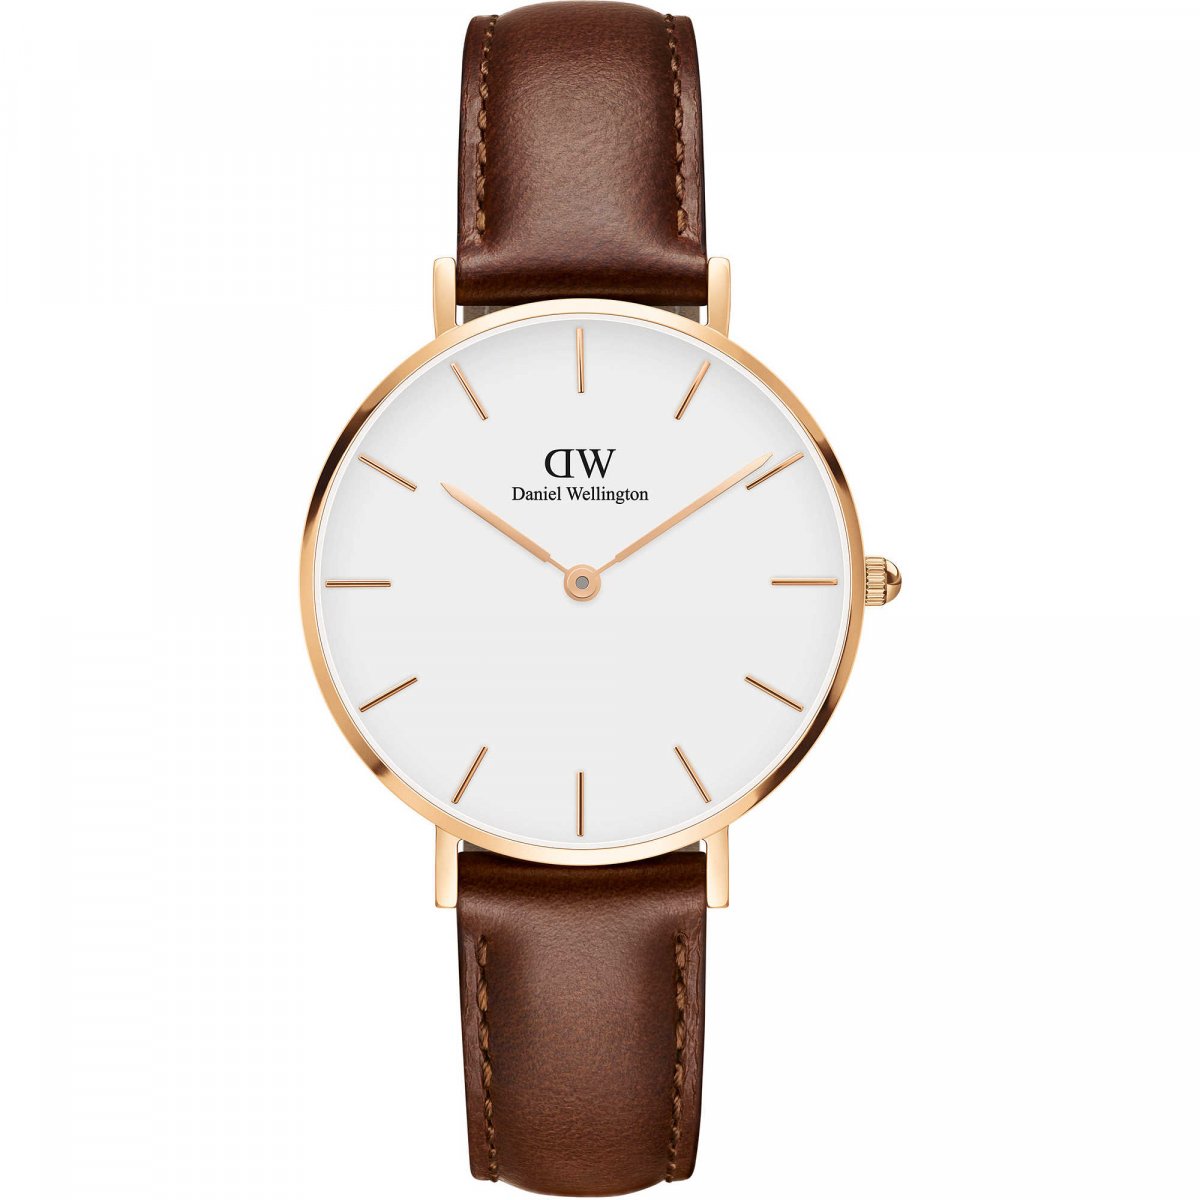 DW Petite St Mawes 32mm - London Time Watches 